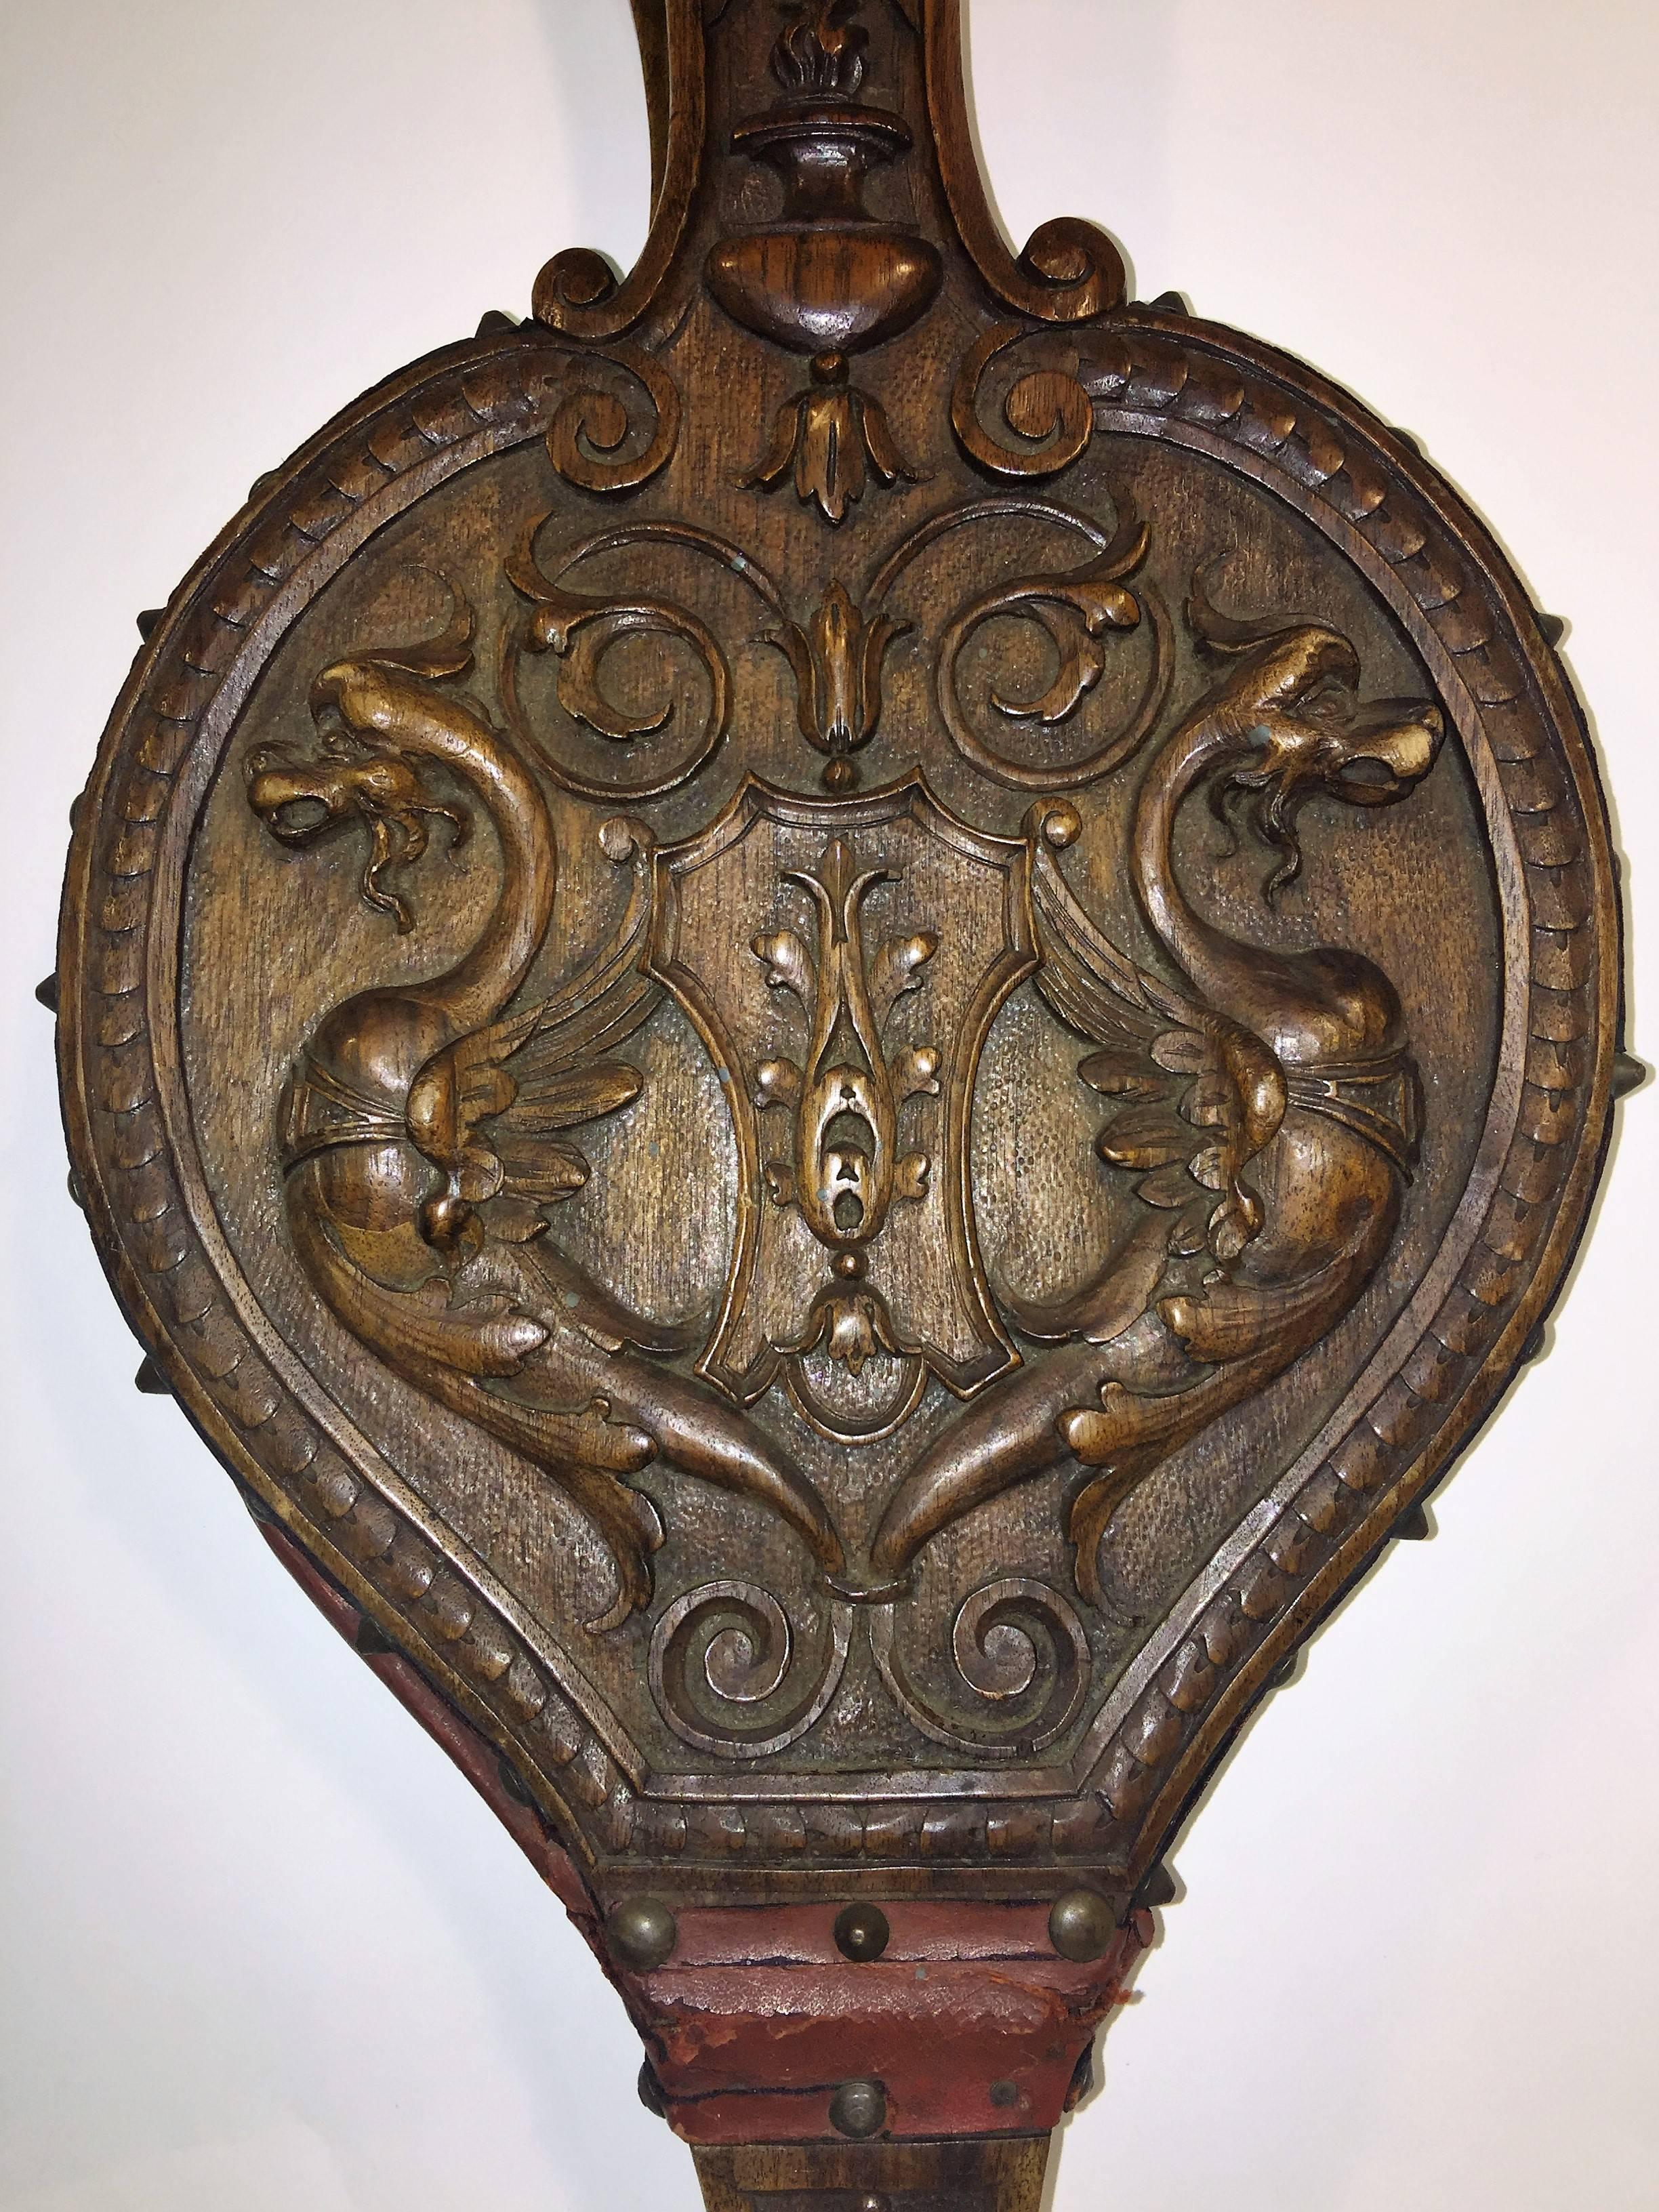 Intricately carved Italian fire bellows decorated with winged griffins, roaring lion head and torch and coat of arms and on the verso a beautiful carved north wind face. Lined with a red leather to expand the bellows to fan a fire. Studded with